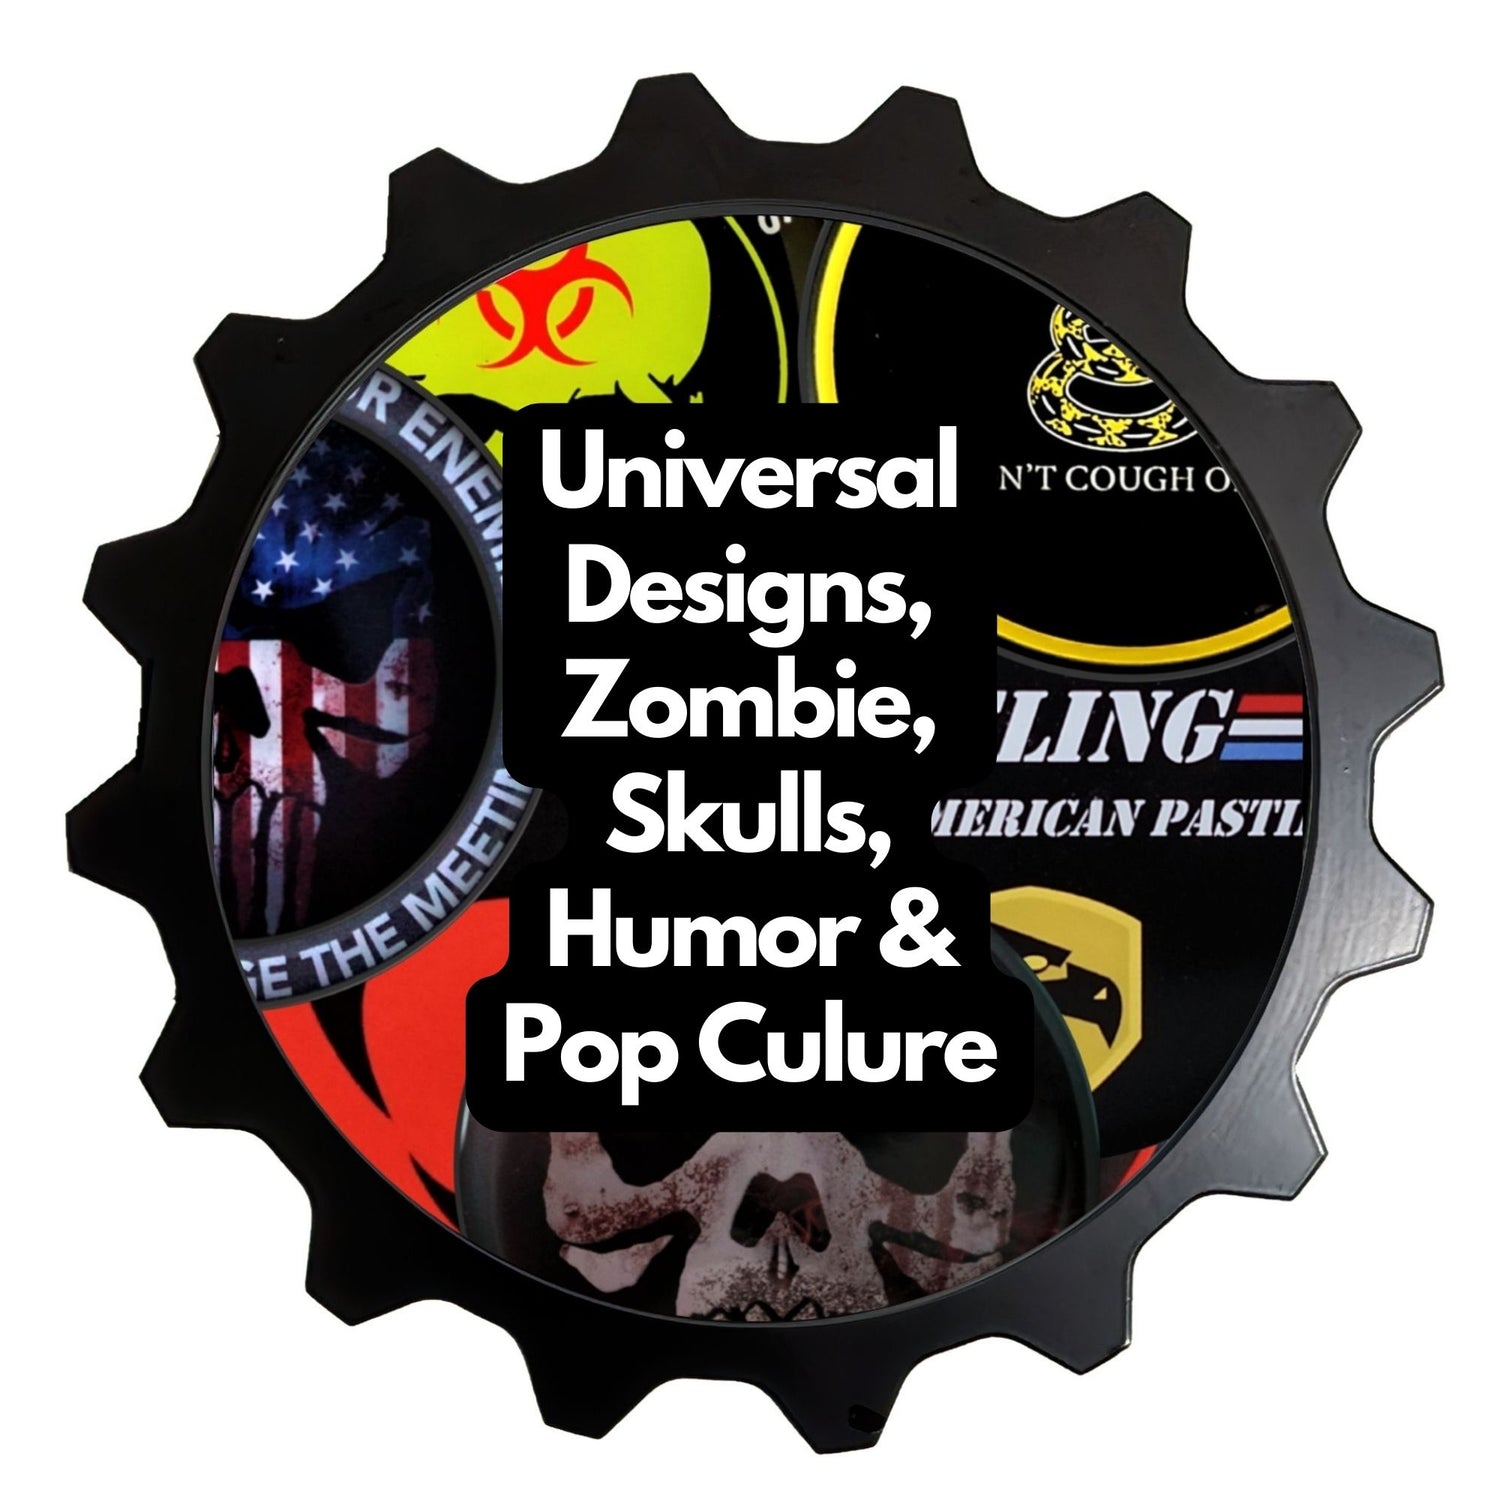 Badges - Universal Vehicle Collection of Pop Culture, Skulls, Funny & Zombie Themes